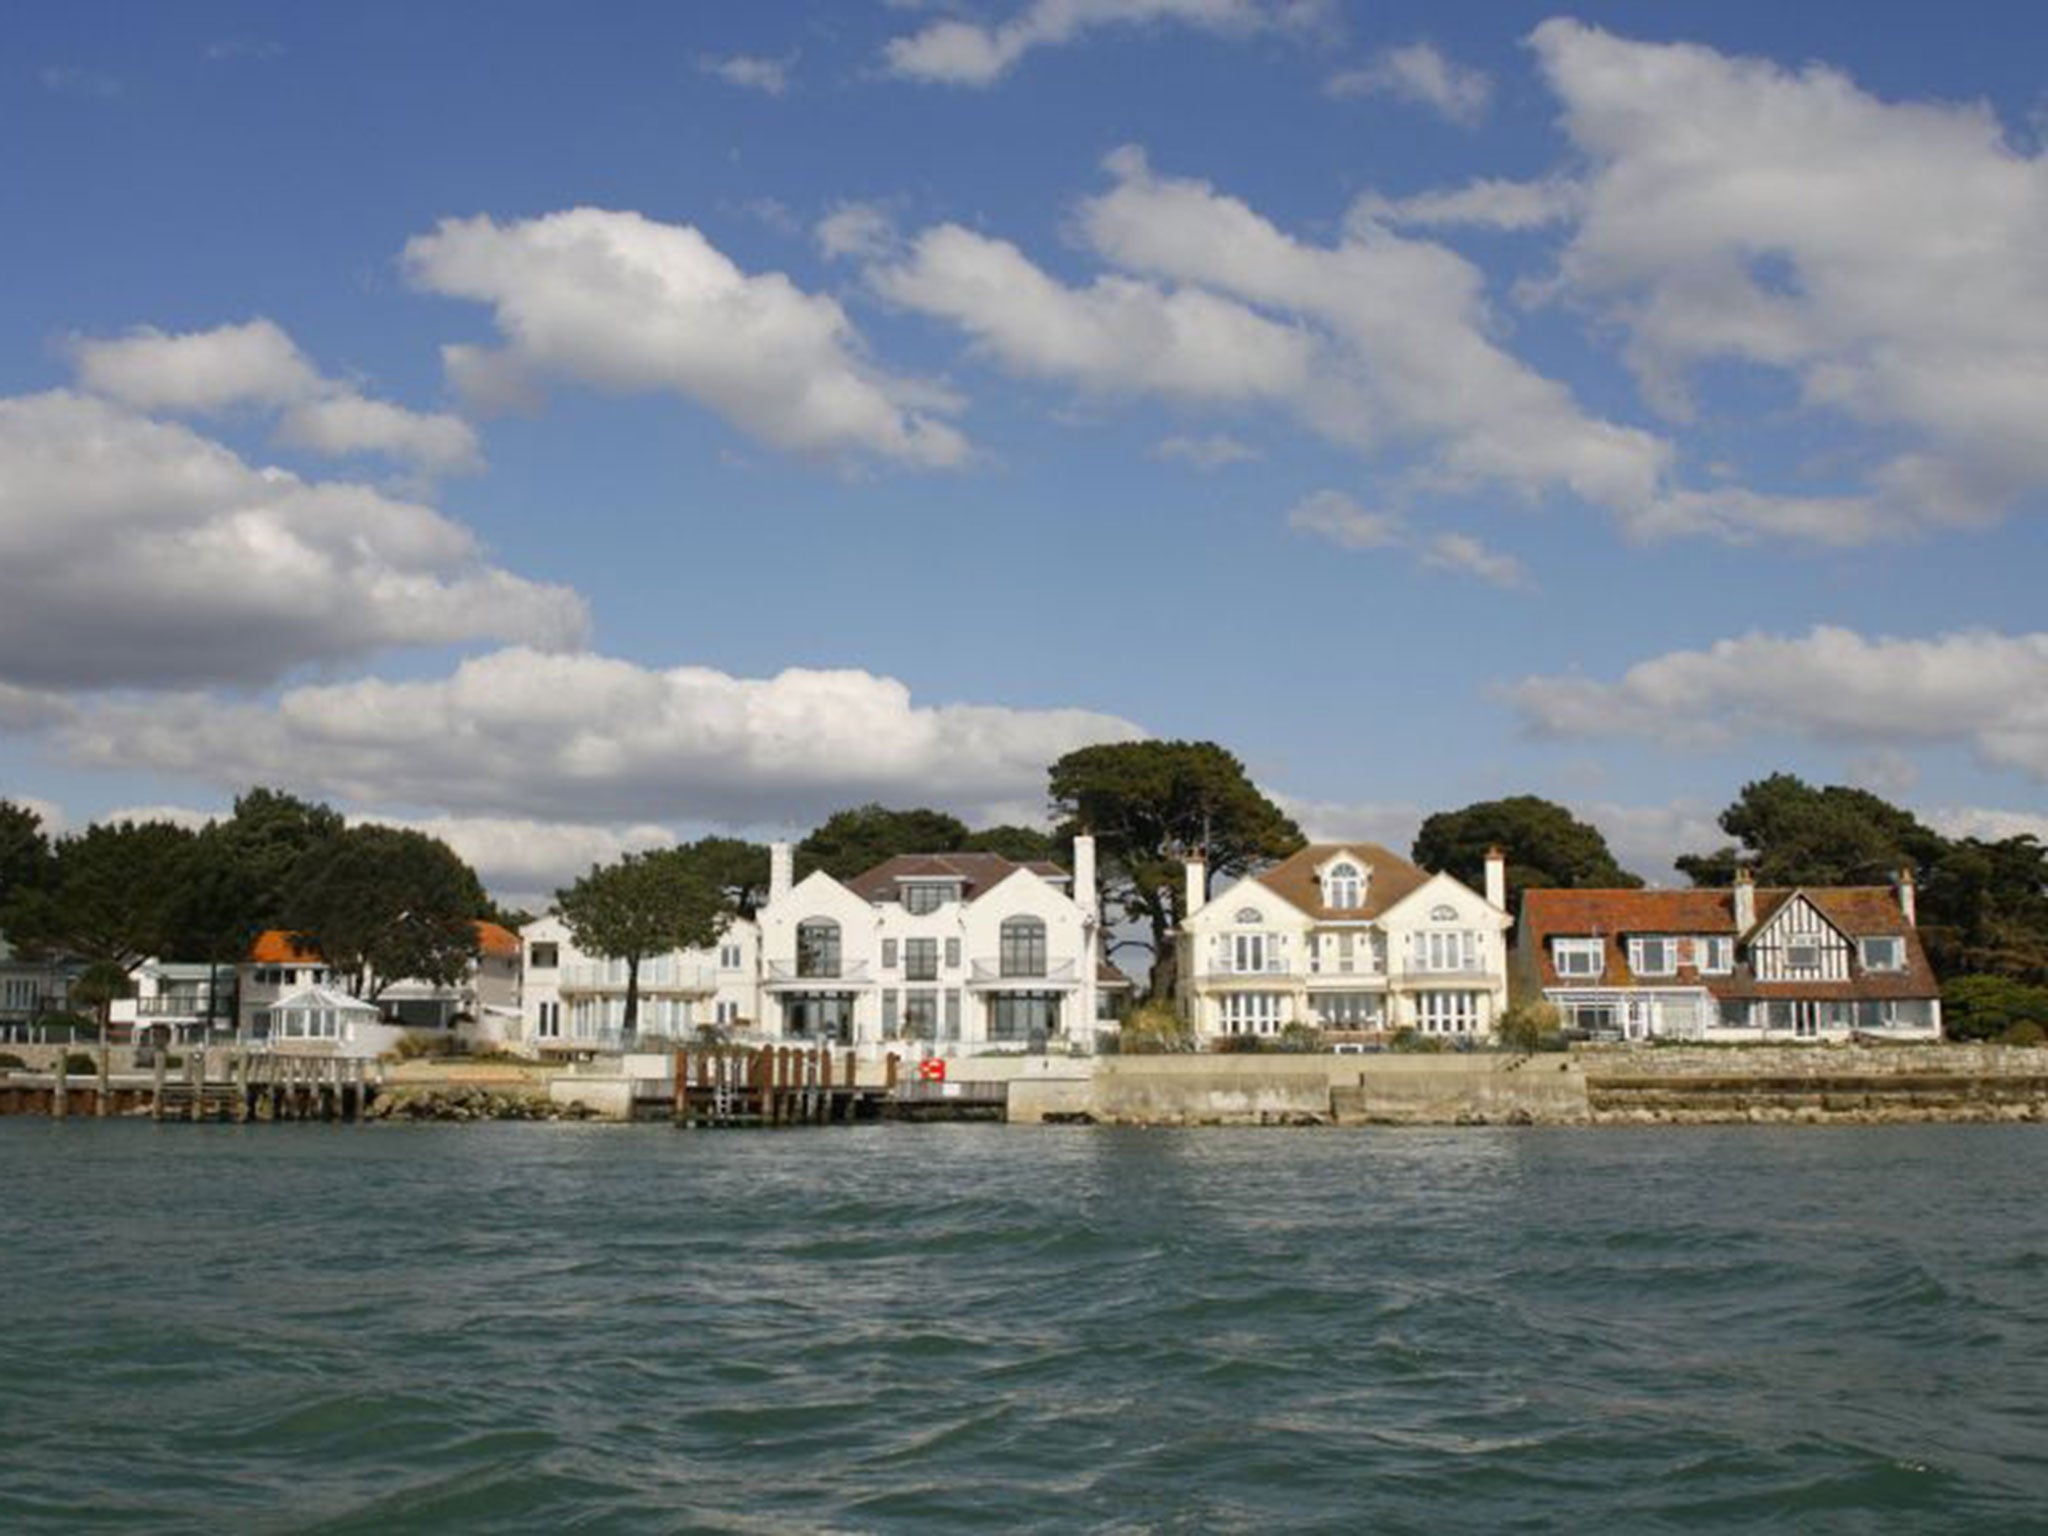 Sandbanks is just one of the towns in the south-west of England dominating the list of most expensive seaside towns